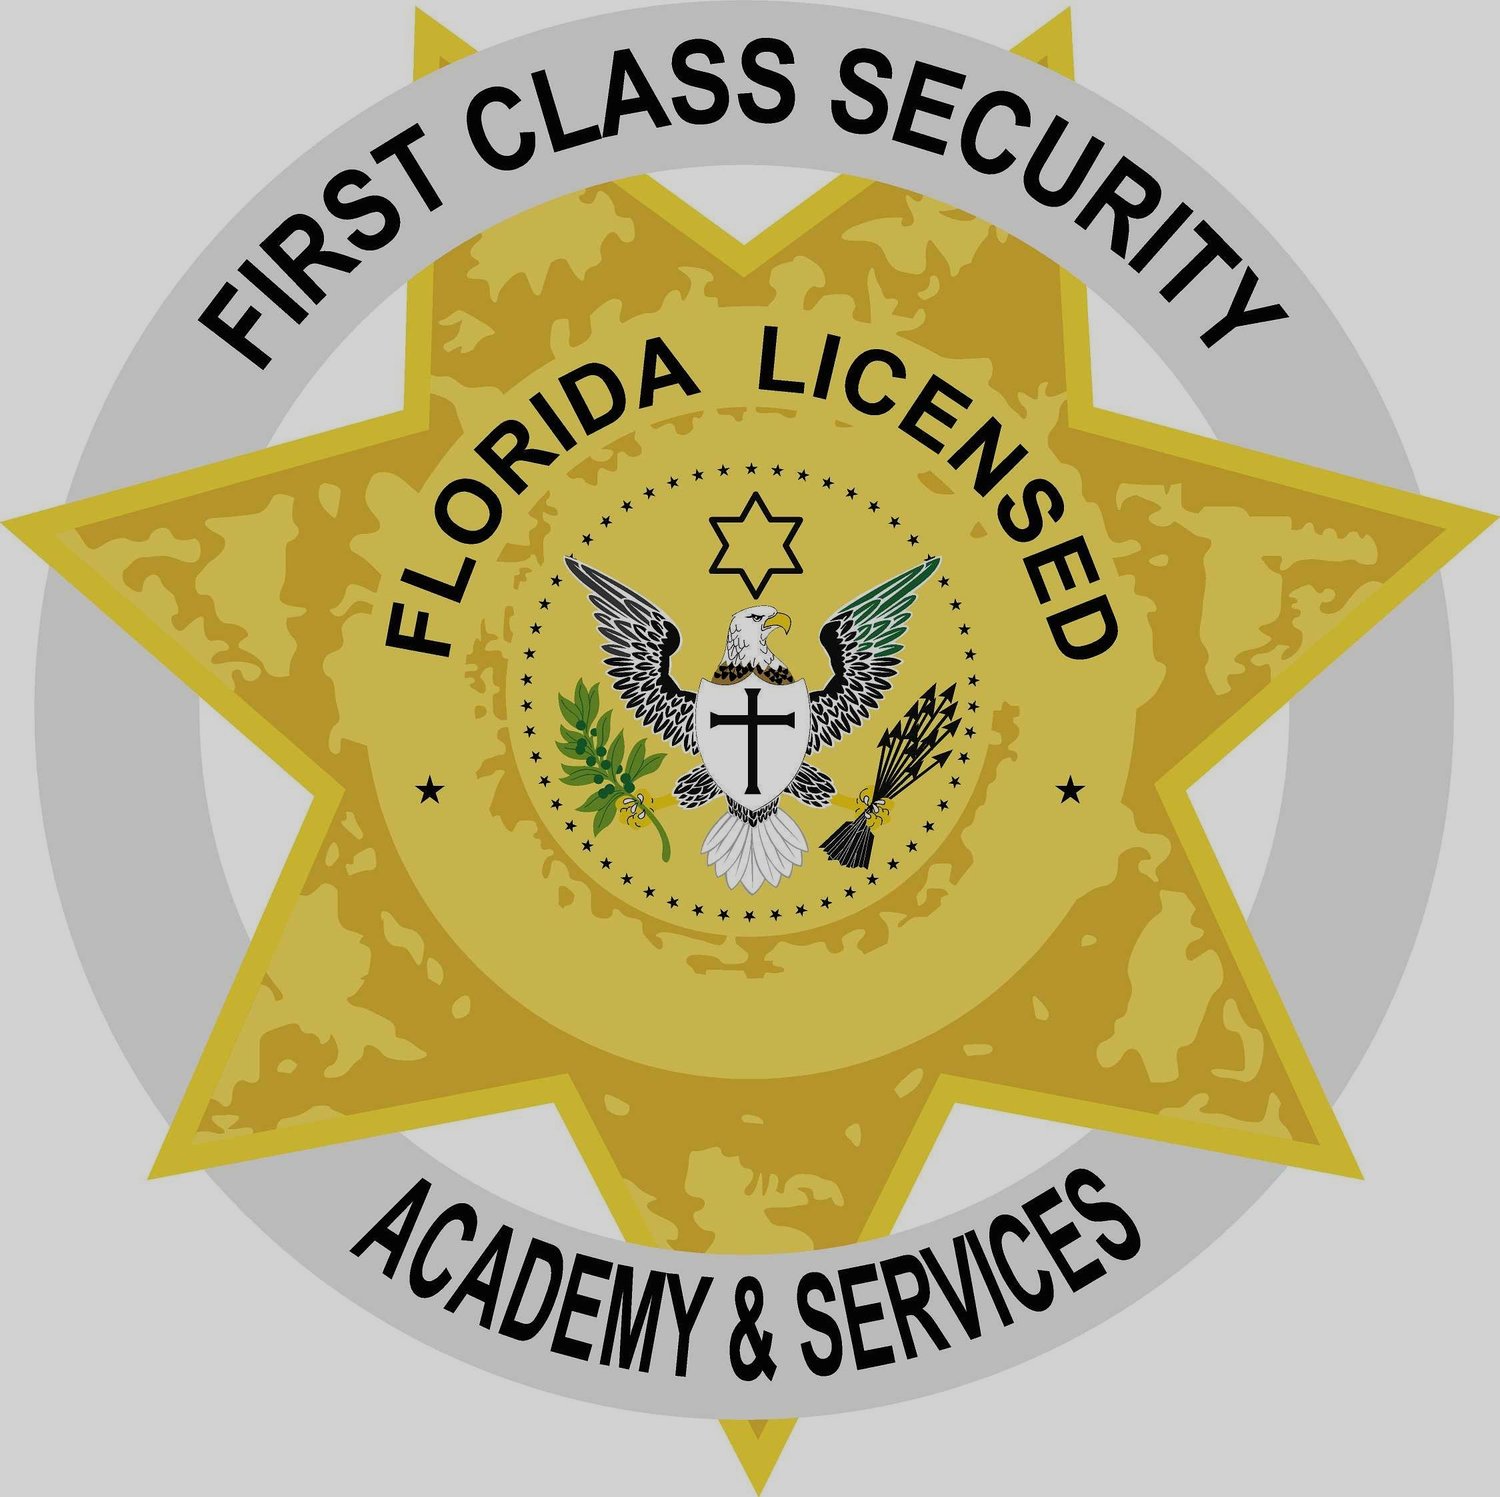 First Class Security Academy &amp; Services